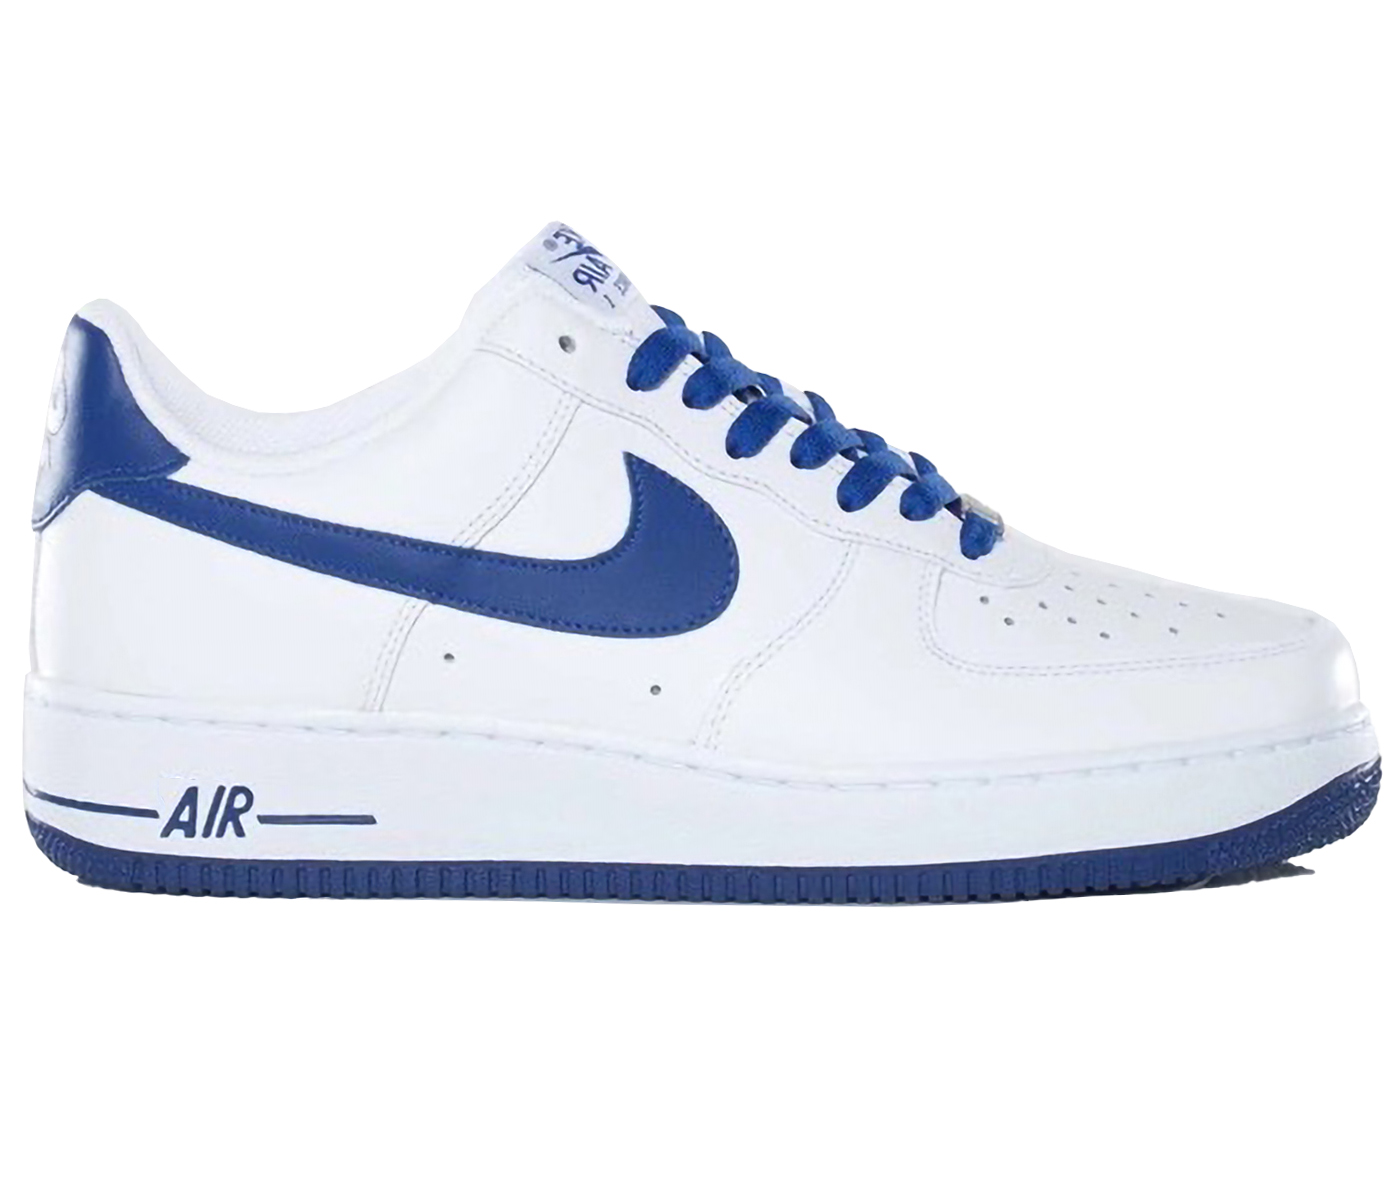 Nike Air Force 1 Low White Old Royal - 488298-114 - US